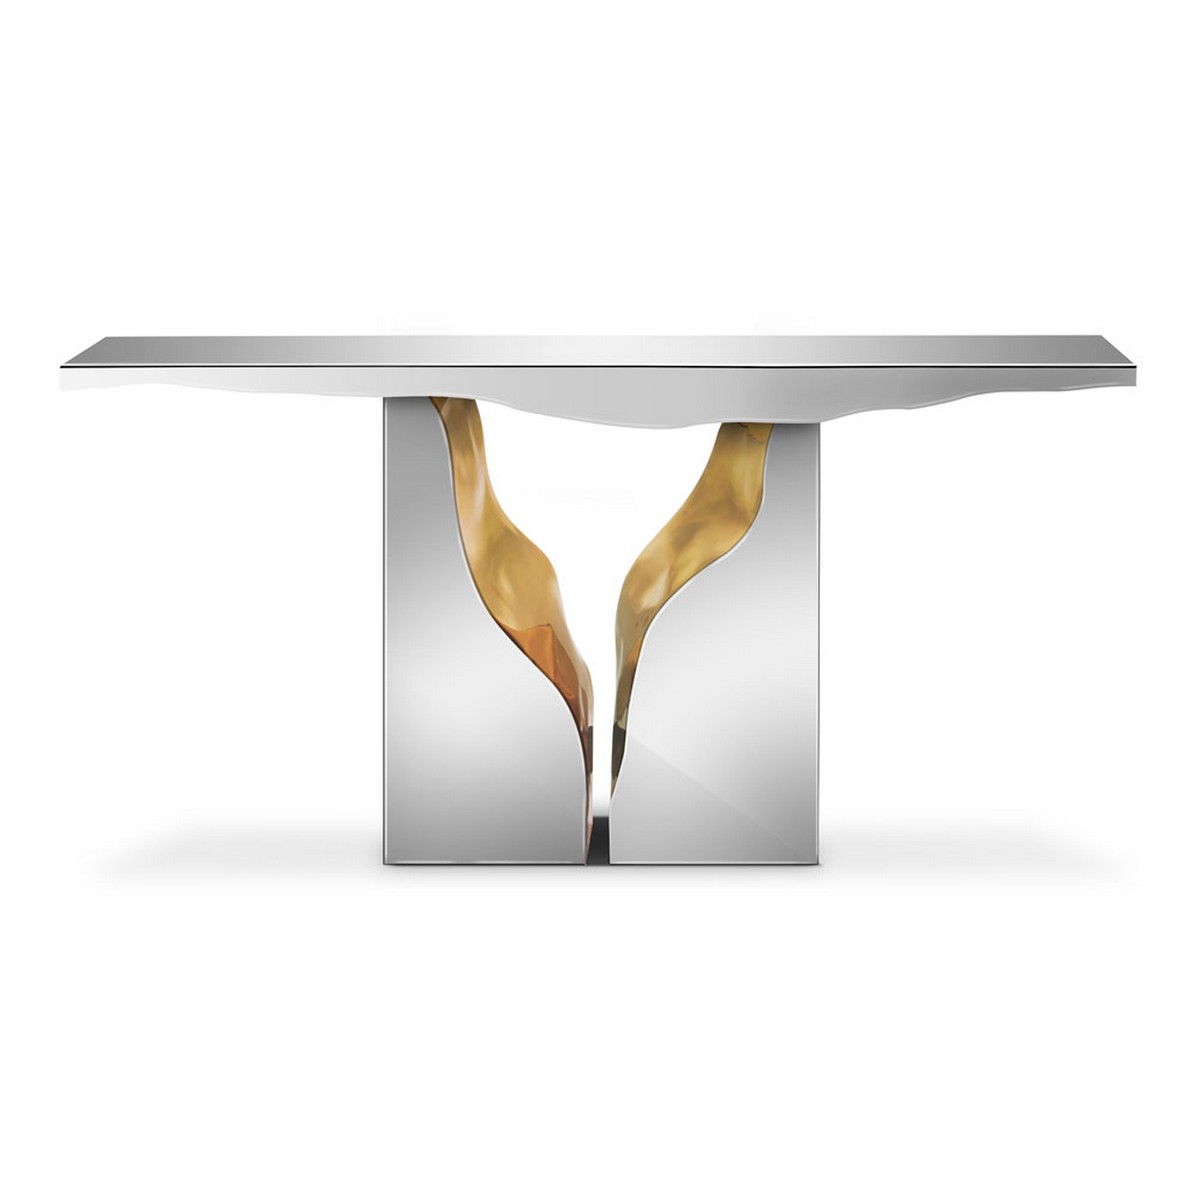 Console Tables You Will Find at Covet NYC